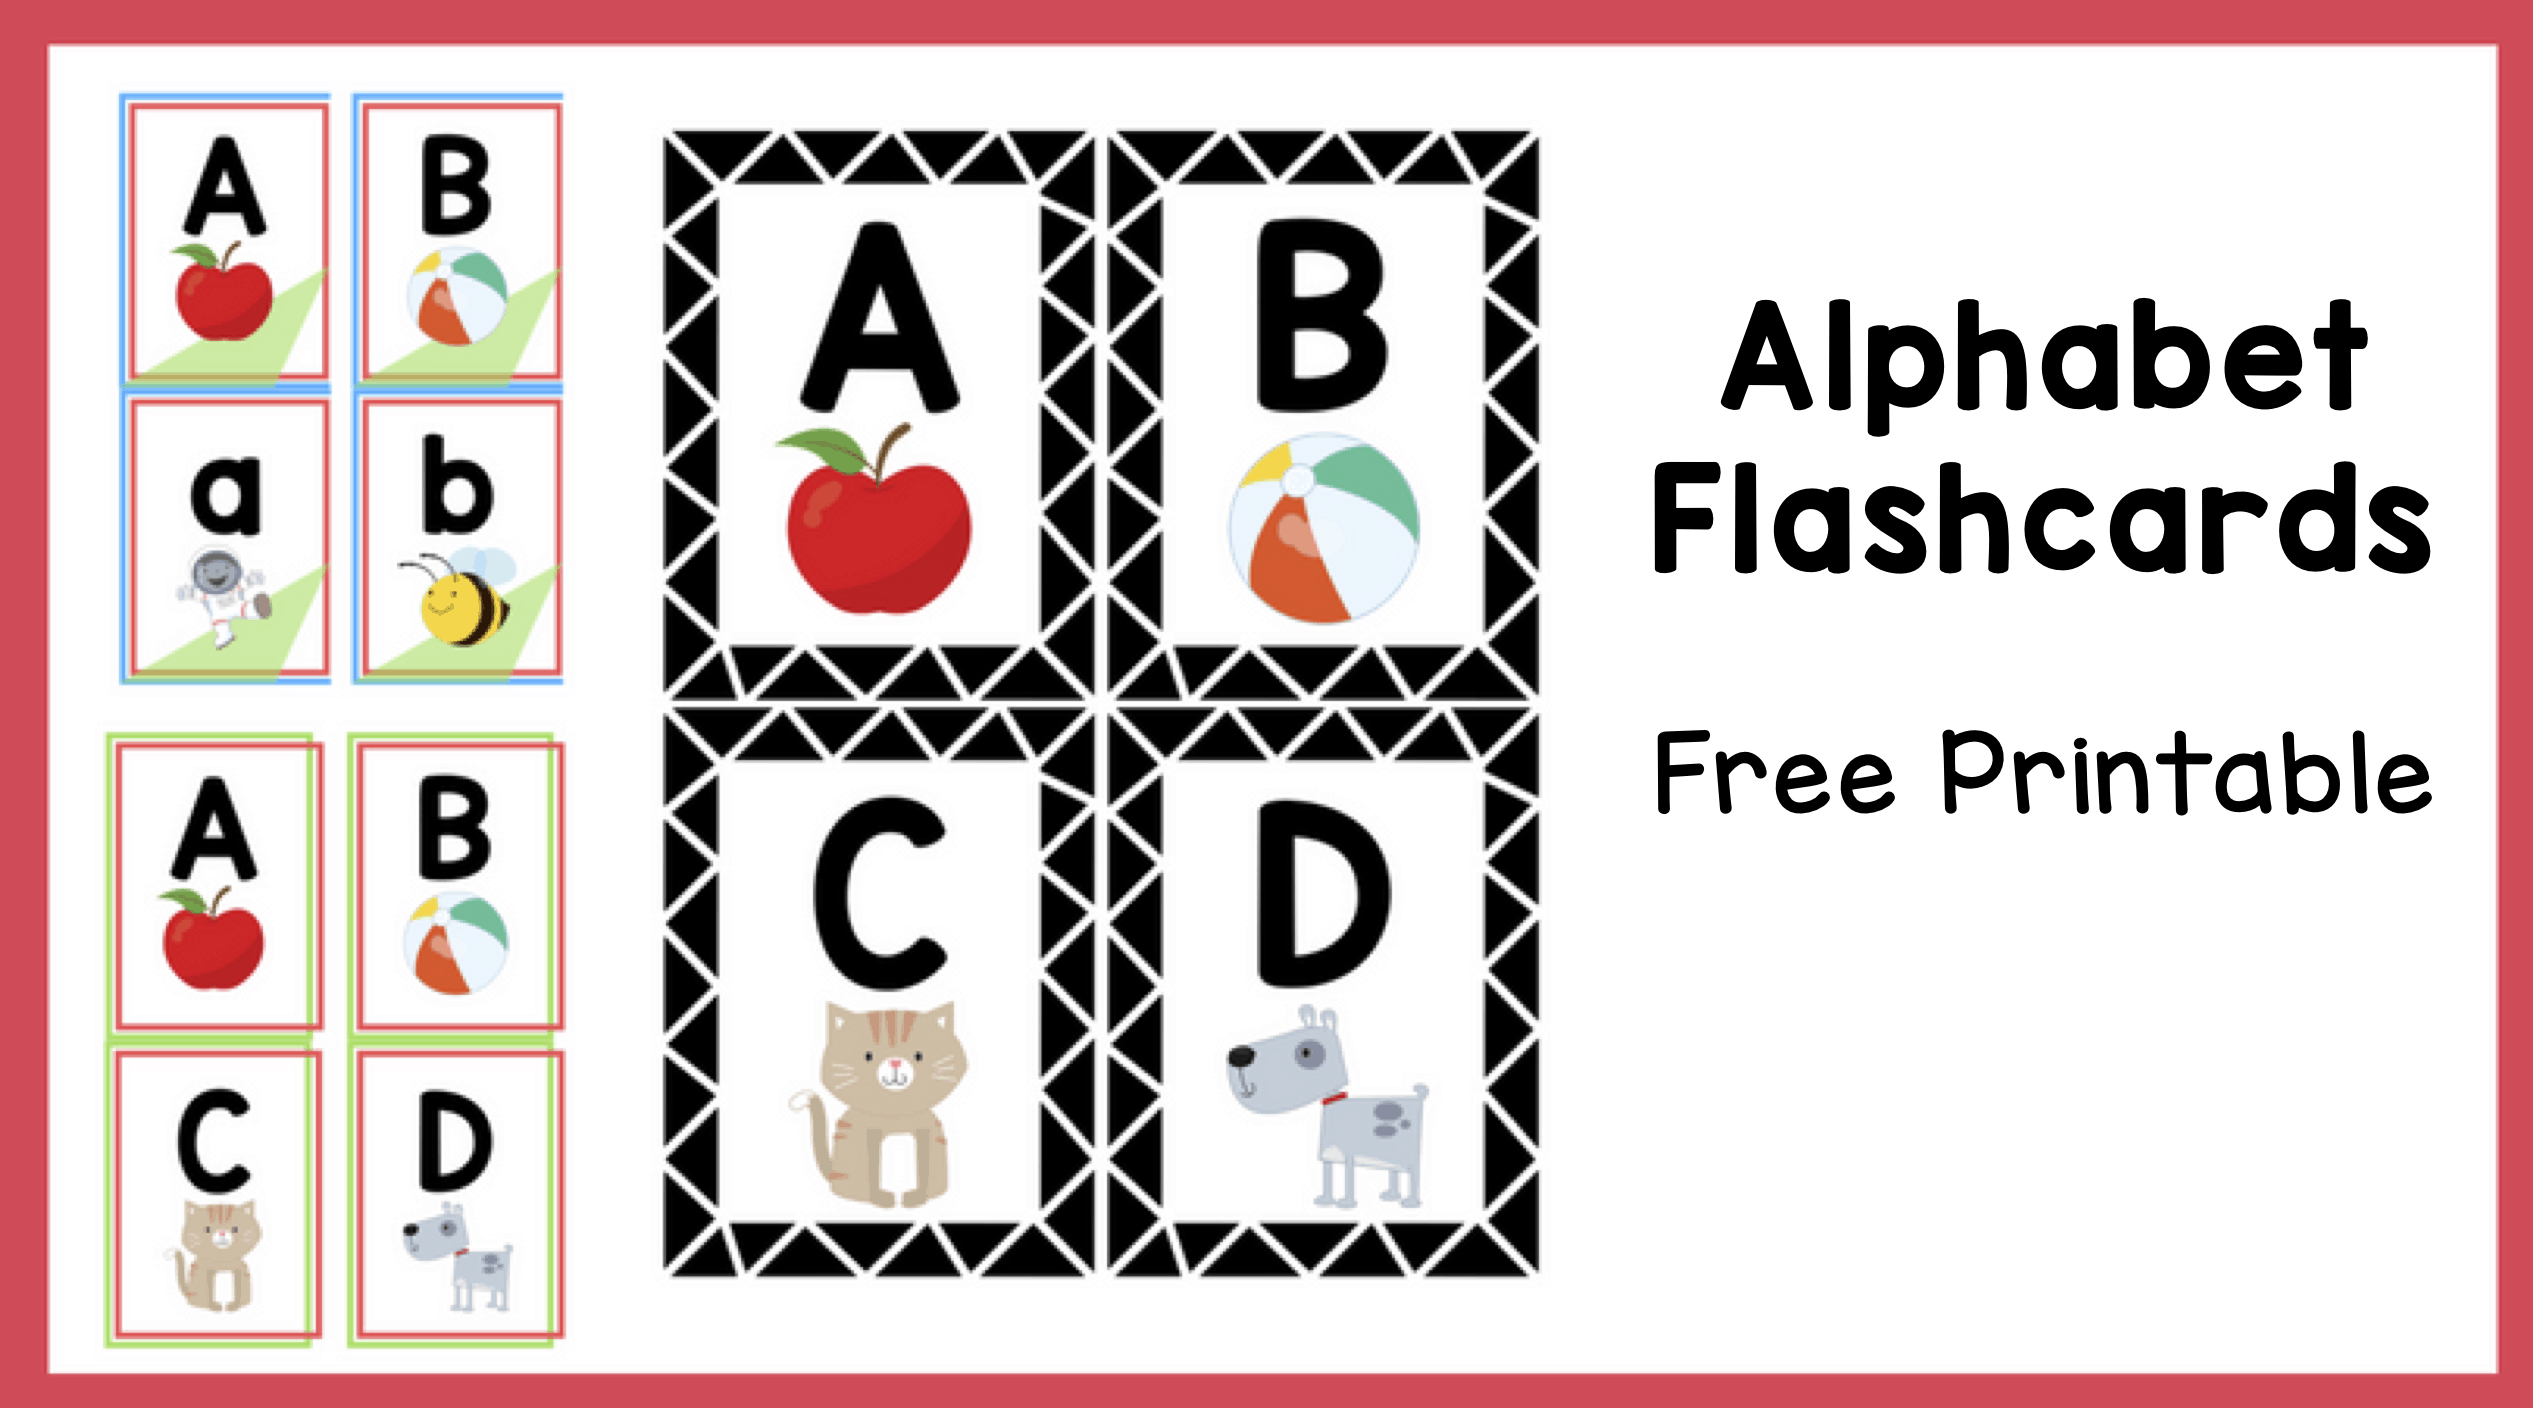 Alphabet Flashcards Free Printable - The Teaching Aunt regarding Free Printable Abc Flashcards With Pictures